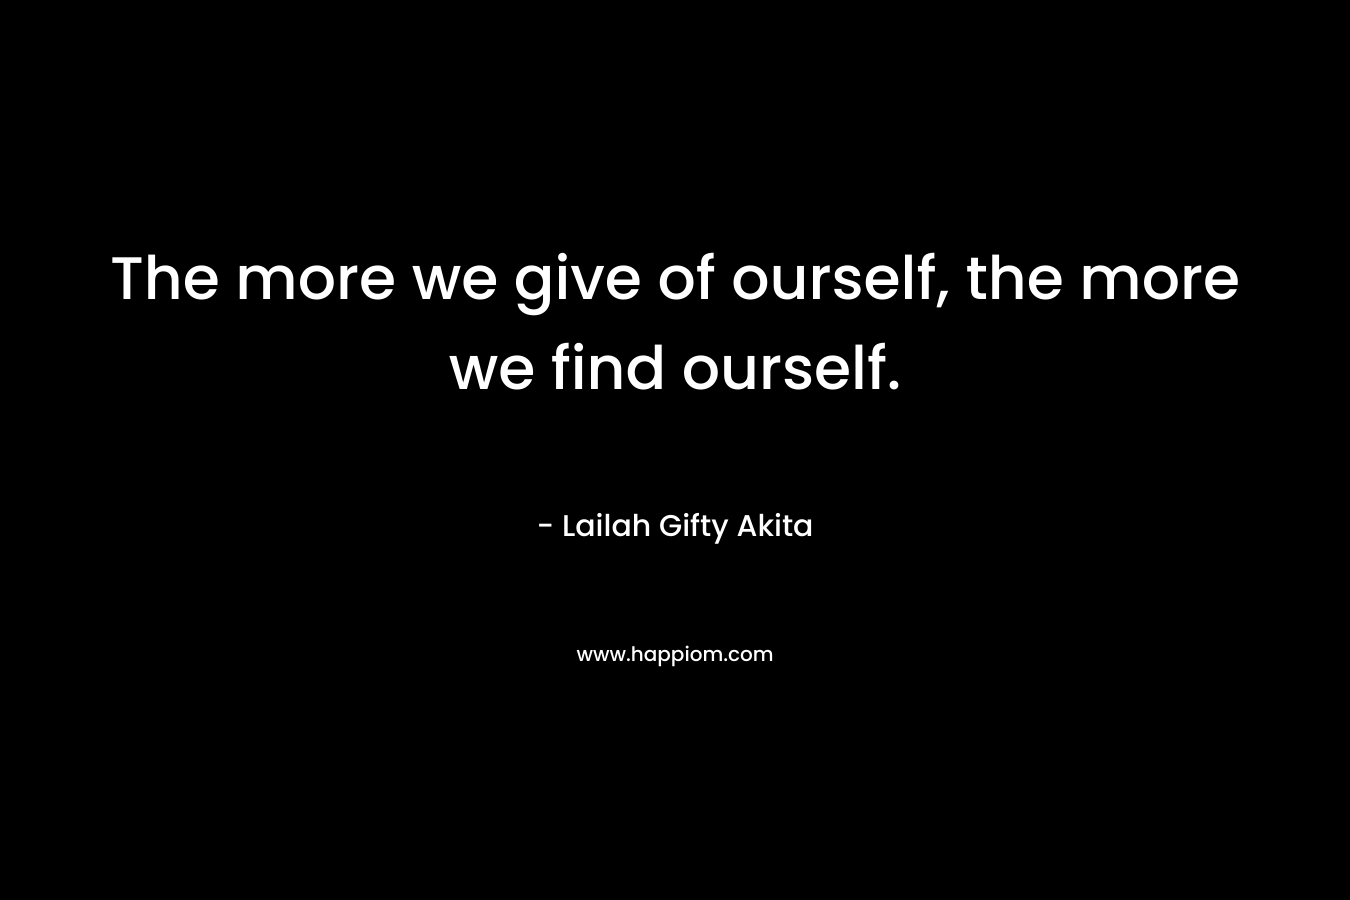 The more we give of ourself, the more we find ourself. – Lailah Gifty Akita